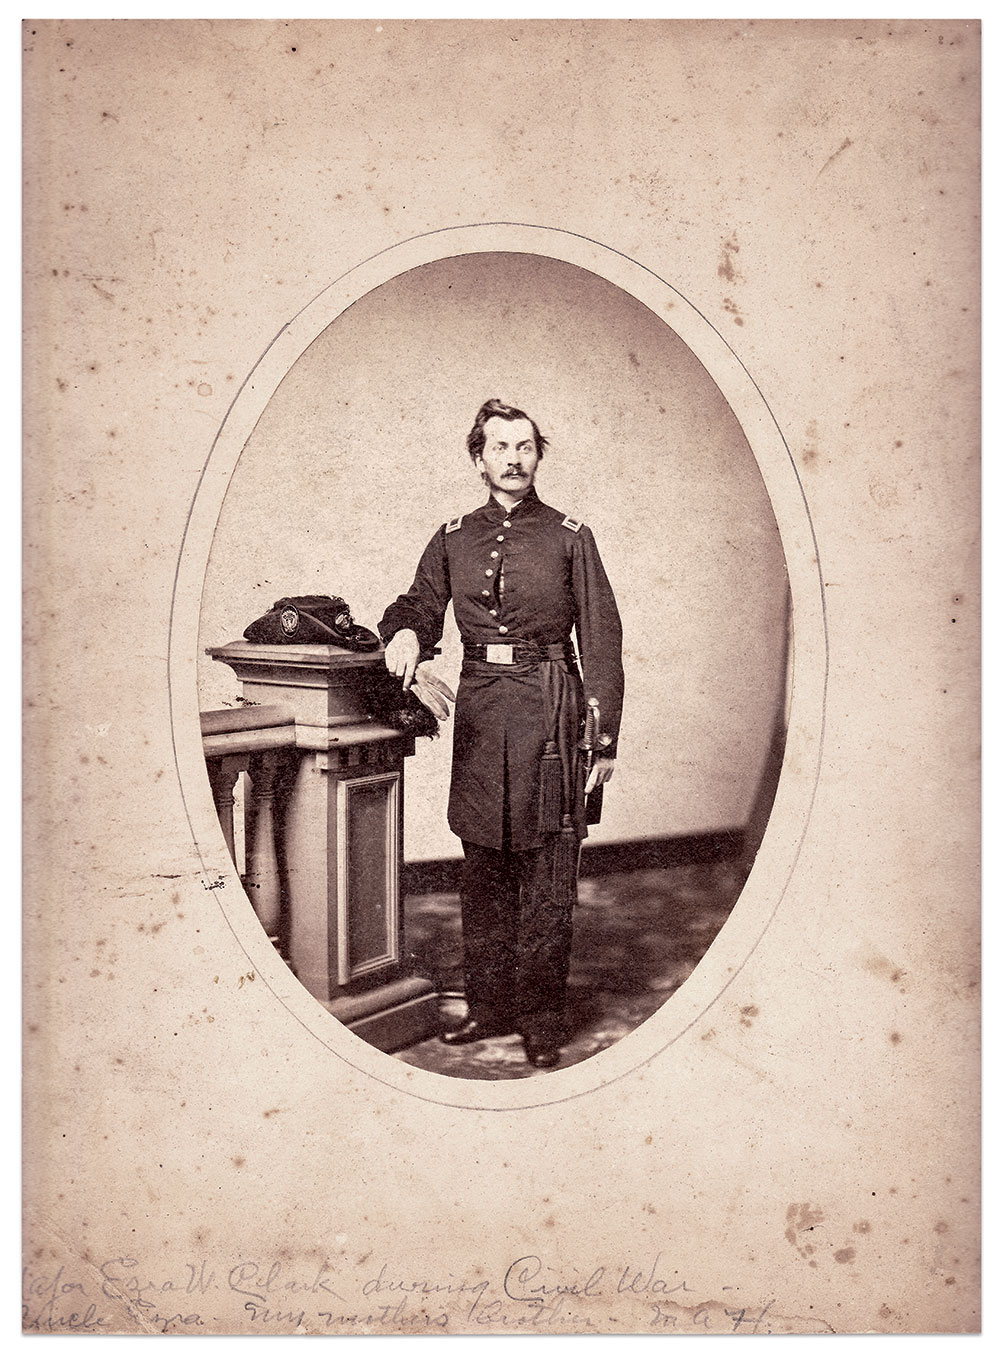 Clark, pictured as first lieutenant and adjutant of the 34th Ohio Infantry. Albumen print by an unidentified photographer. Dale Niesen Collection.